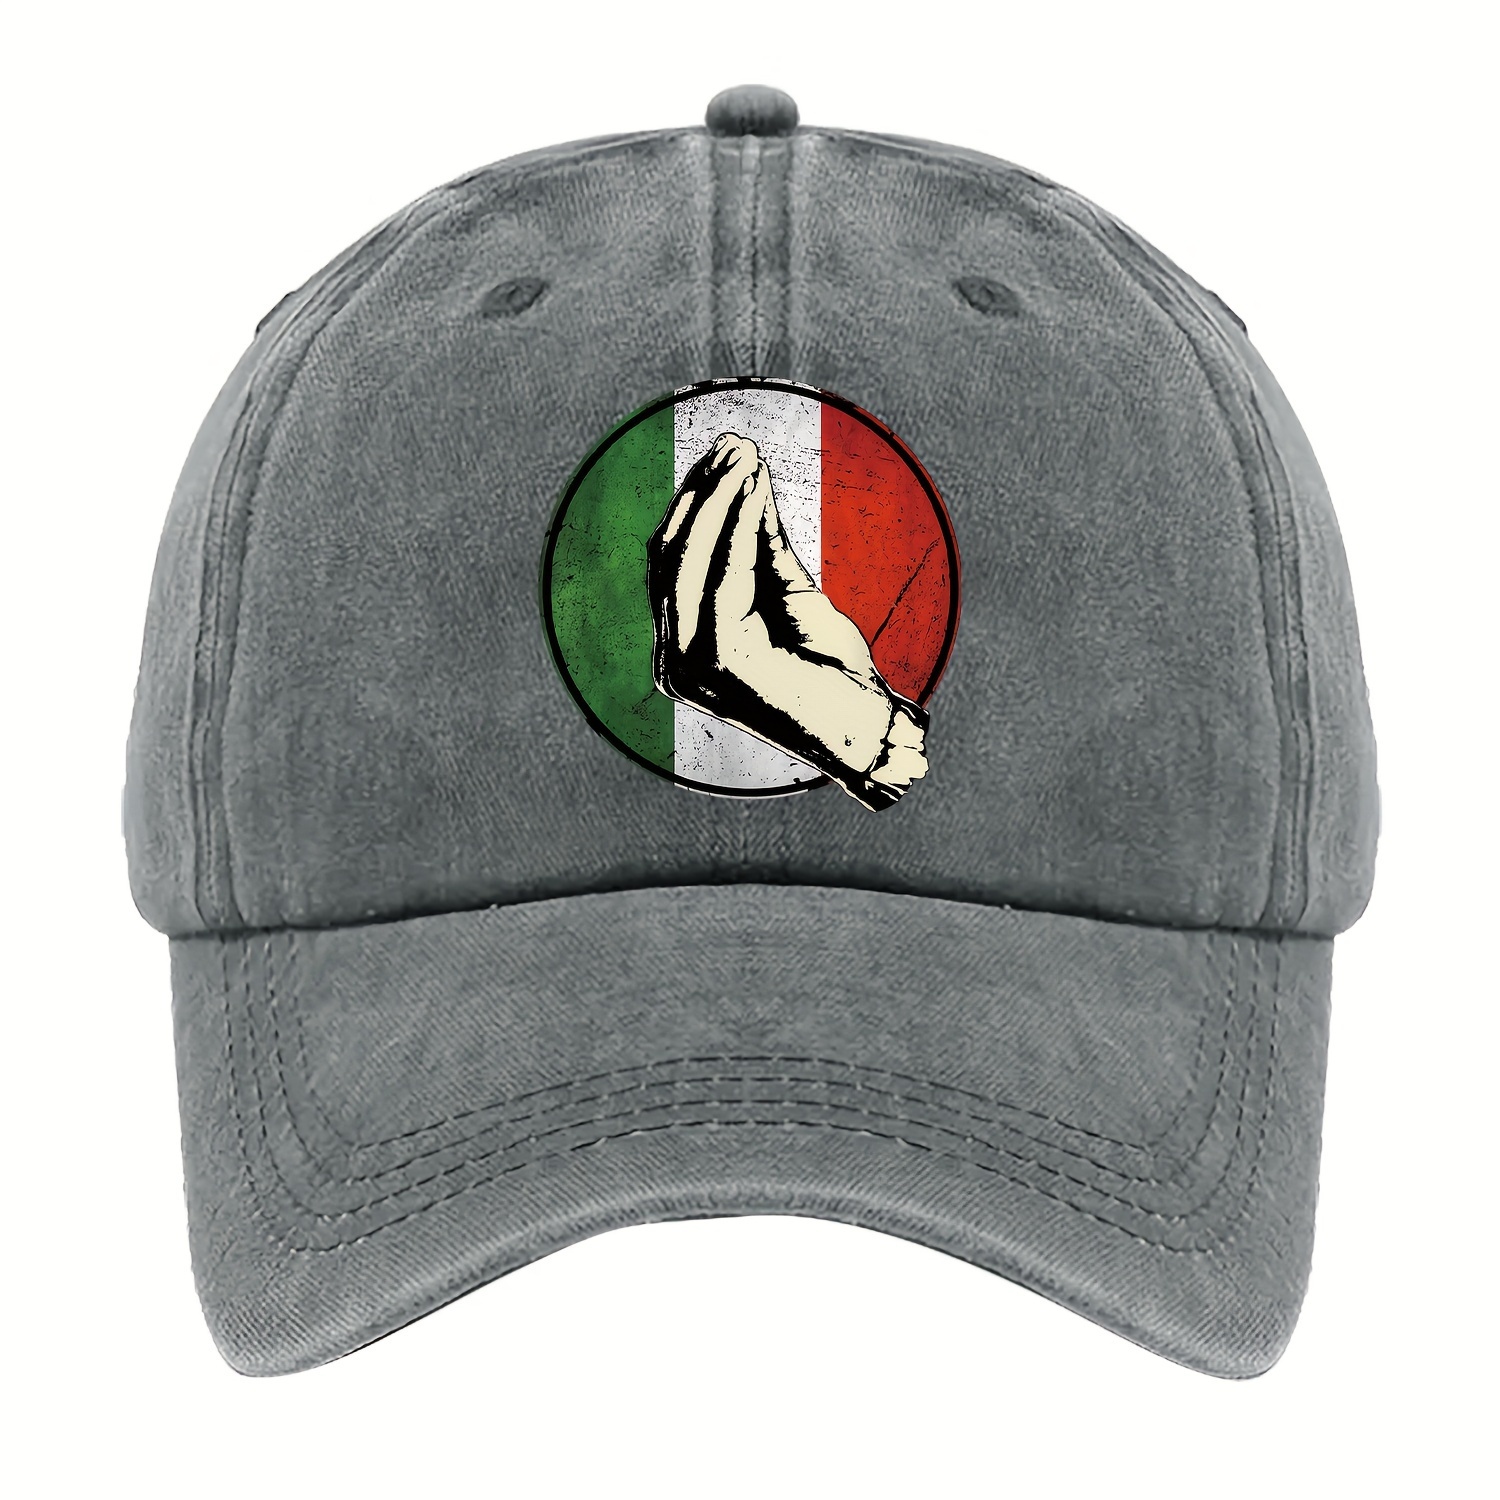 

Vintage Washed Denim Baseball Cap With Italian Pasta Flag Gesture Victory Heat Transfer Print, Retro Distressed Old Look Adjustable Size Hat